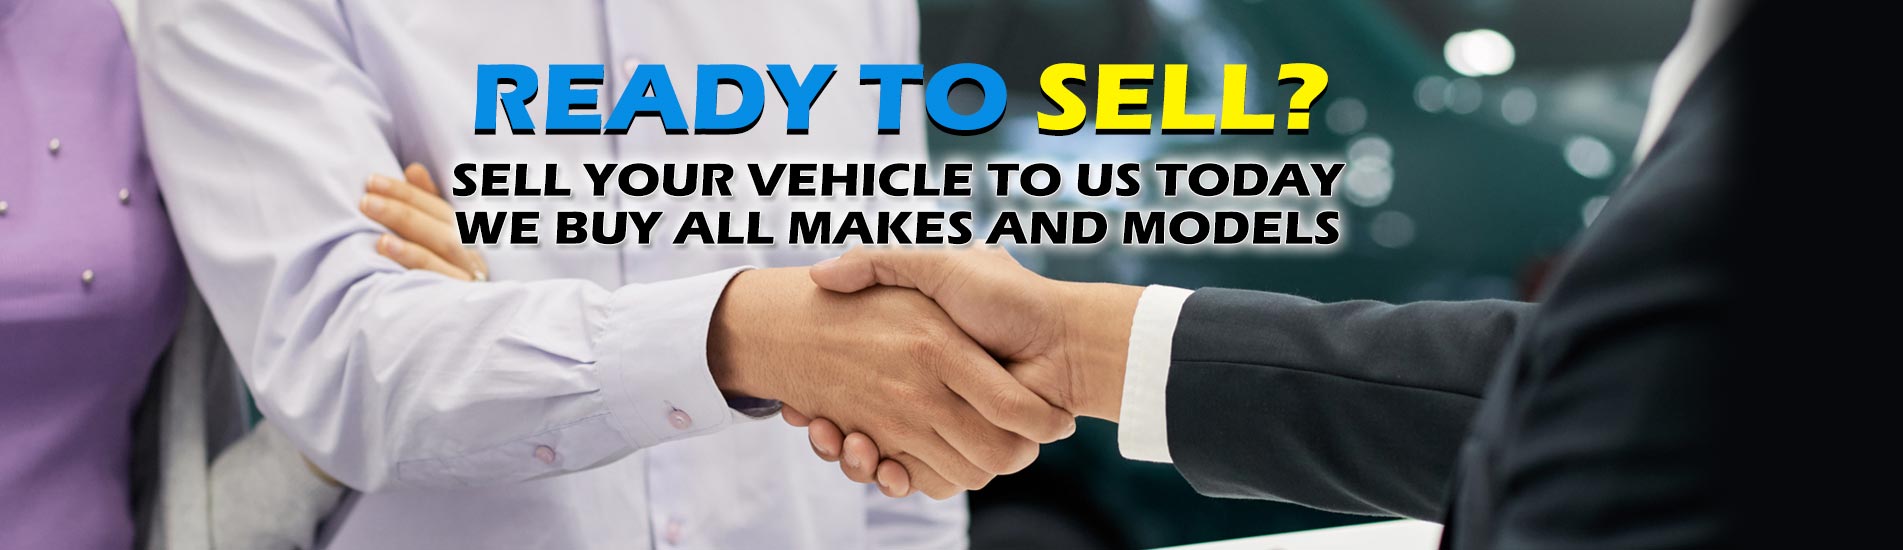 Used cars for sale in Wappingers Falls | Performance Motorcars Inc. Wappingers Falls New York